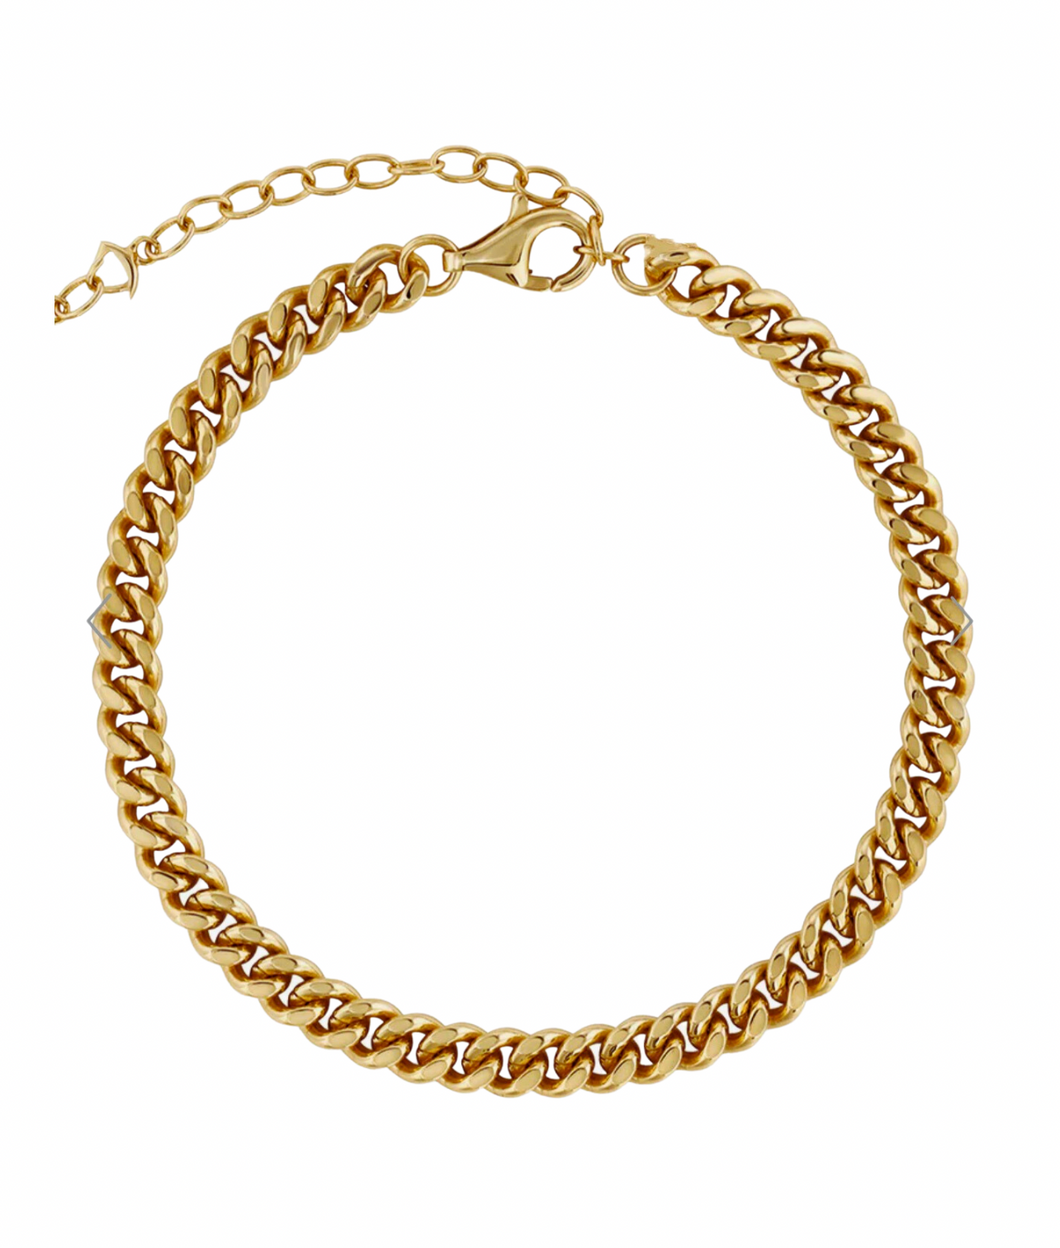 cuban link bracelet gold plated stainless steel